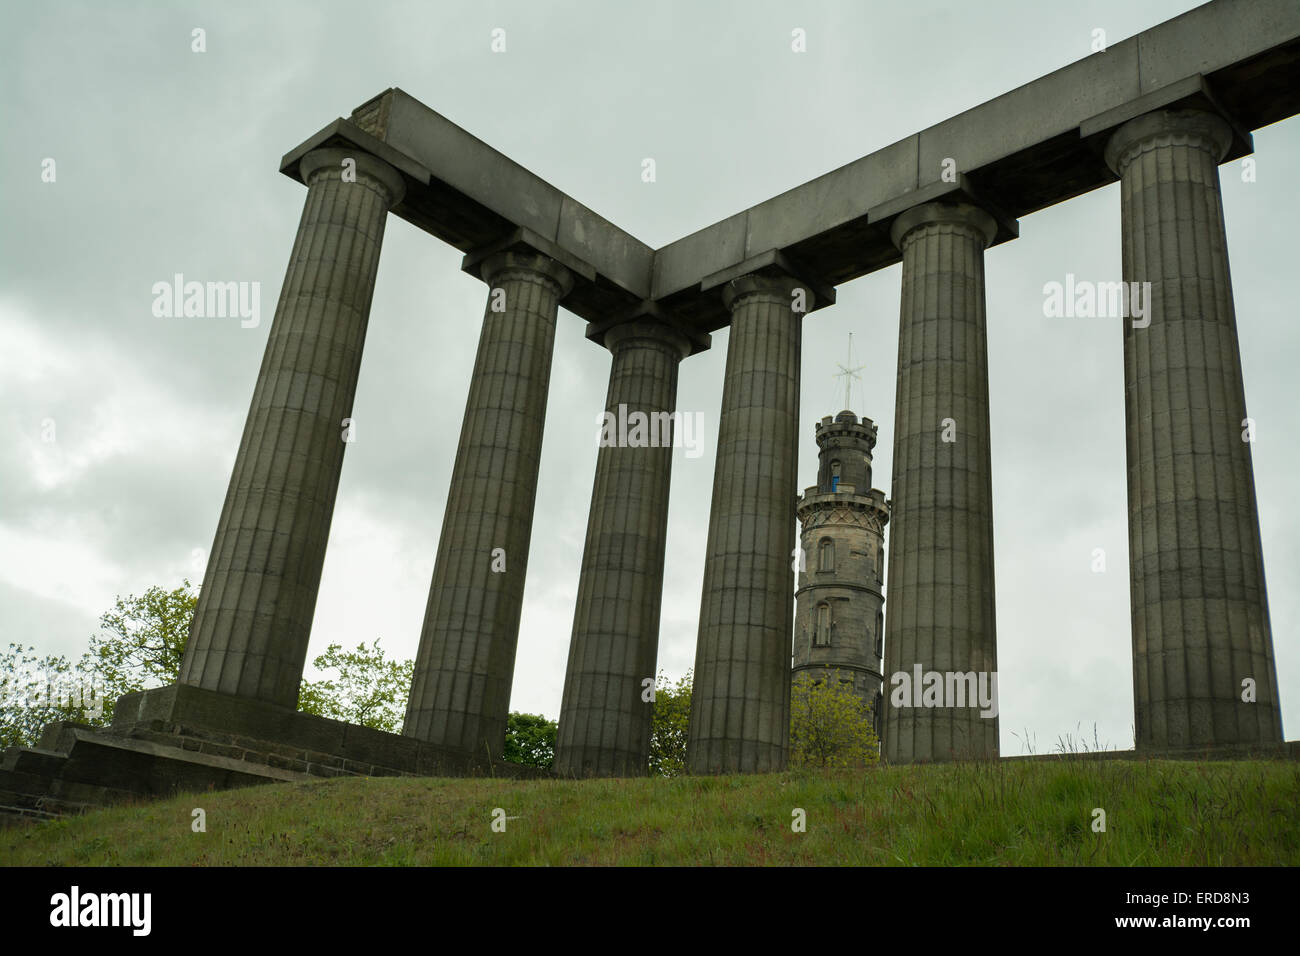 Nelson Monument seen through the columns of the unfinished National Monument of Scotland on Calton Hill - Edinburgh, Scotland Stock Photo